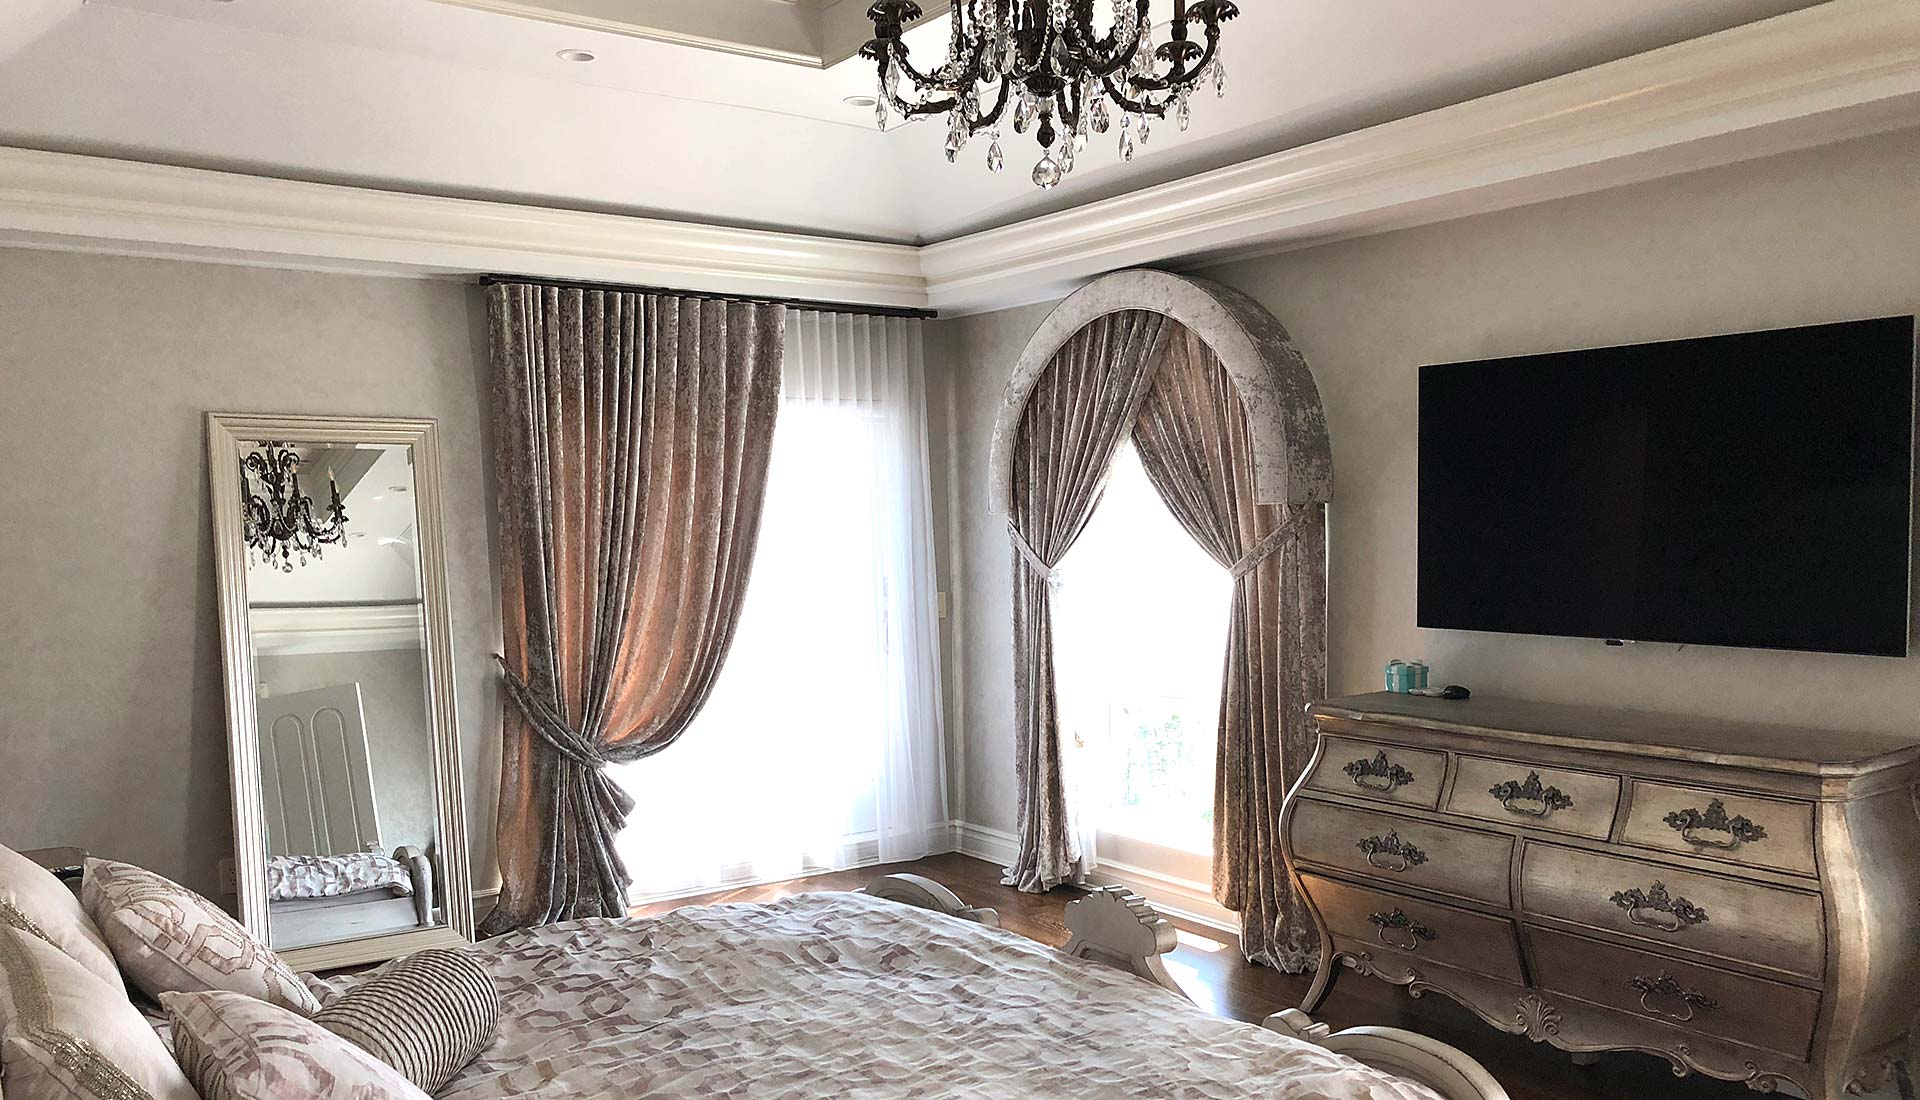 Bedroom Traditional Style Window Treatment